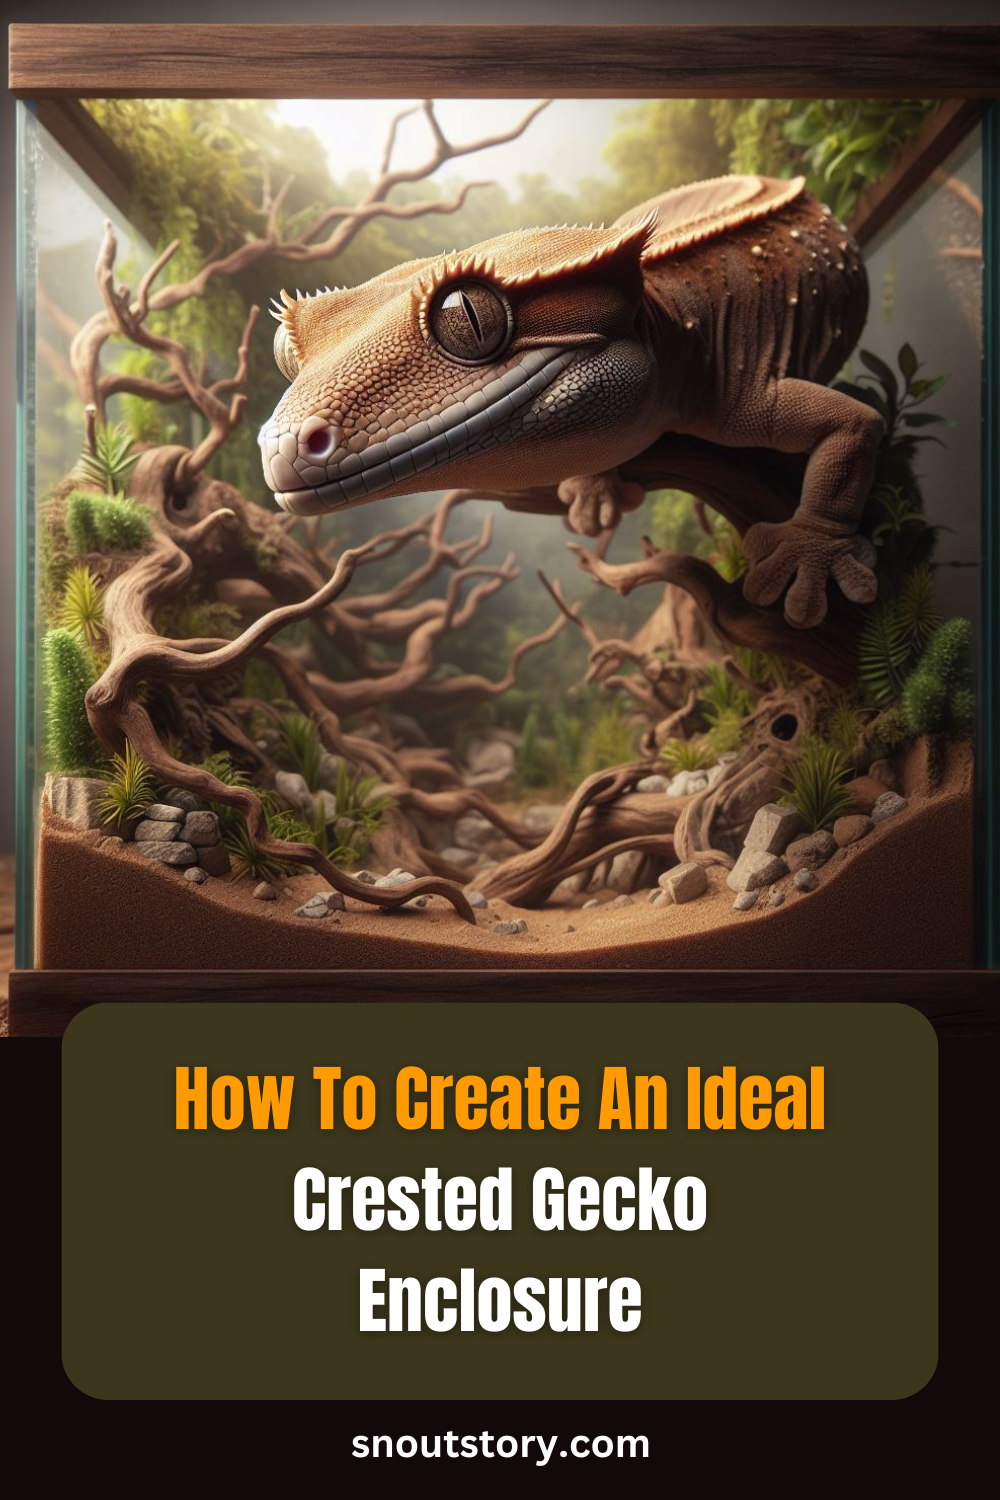 How To Create An Ideal Crested Gecko Enclosure